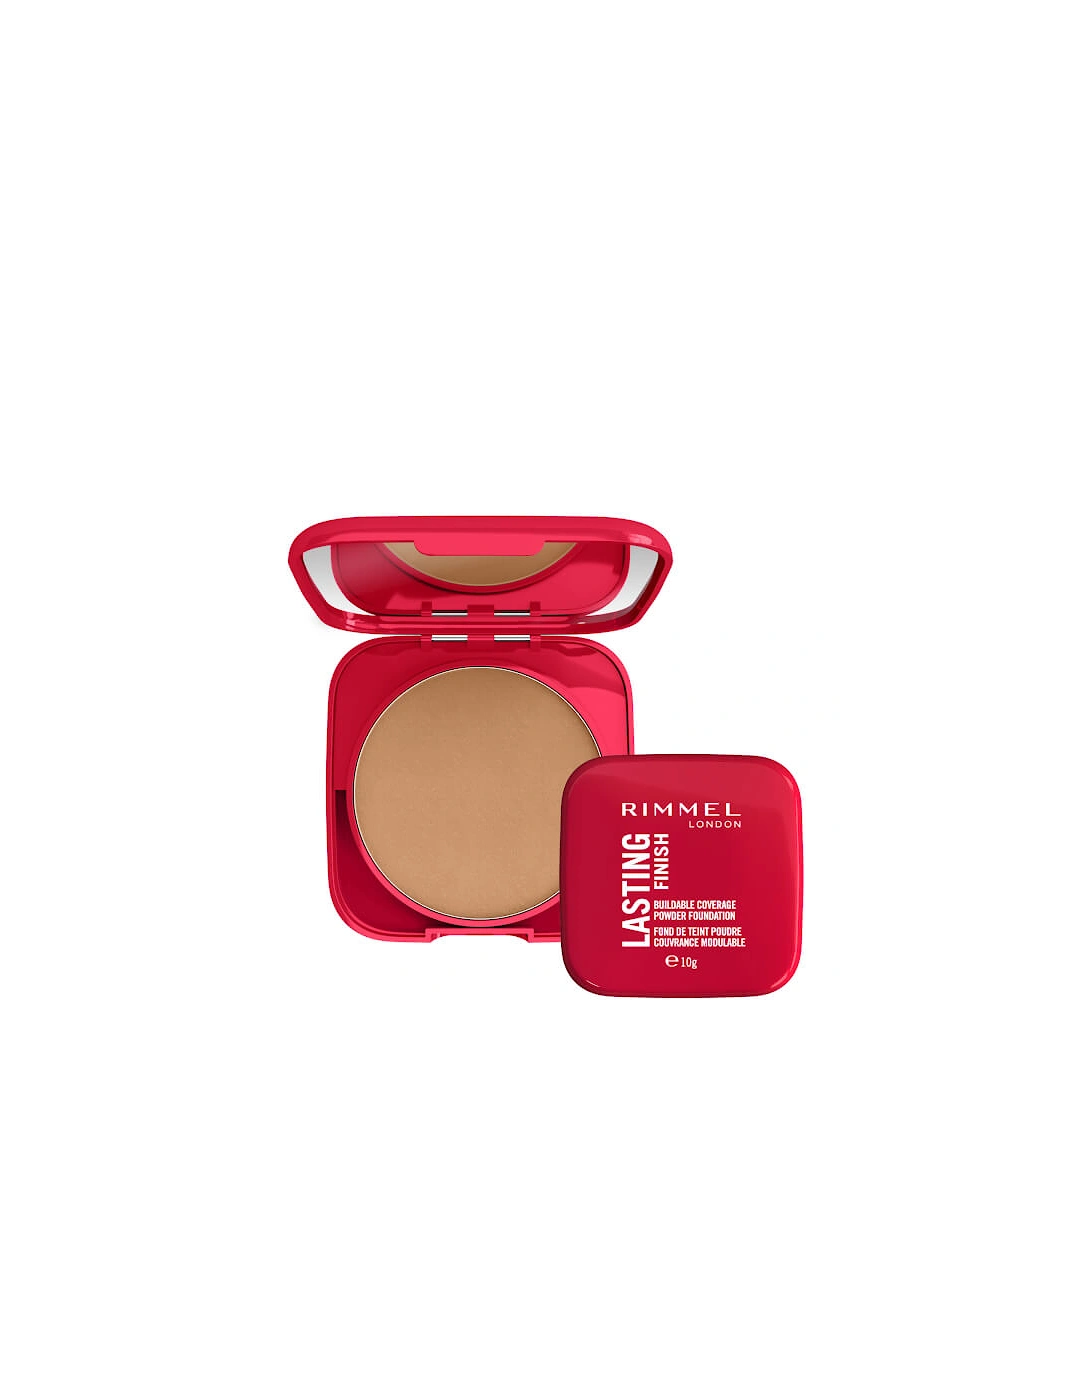 London Lasting Finish Compact Foundation - 007 Golden Beige, 2 of 1